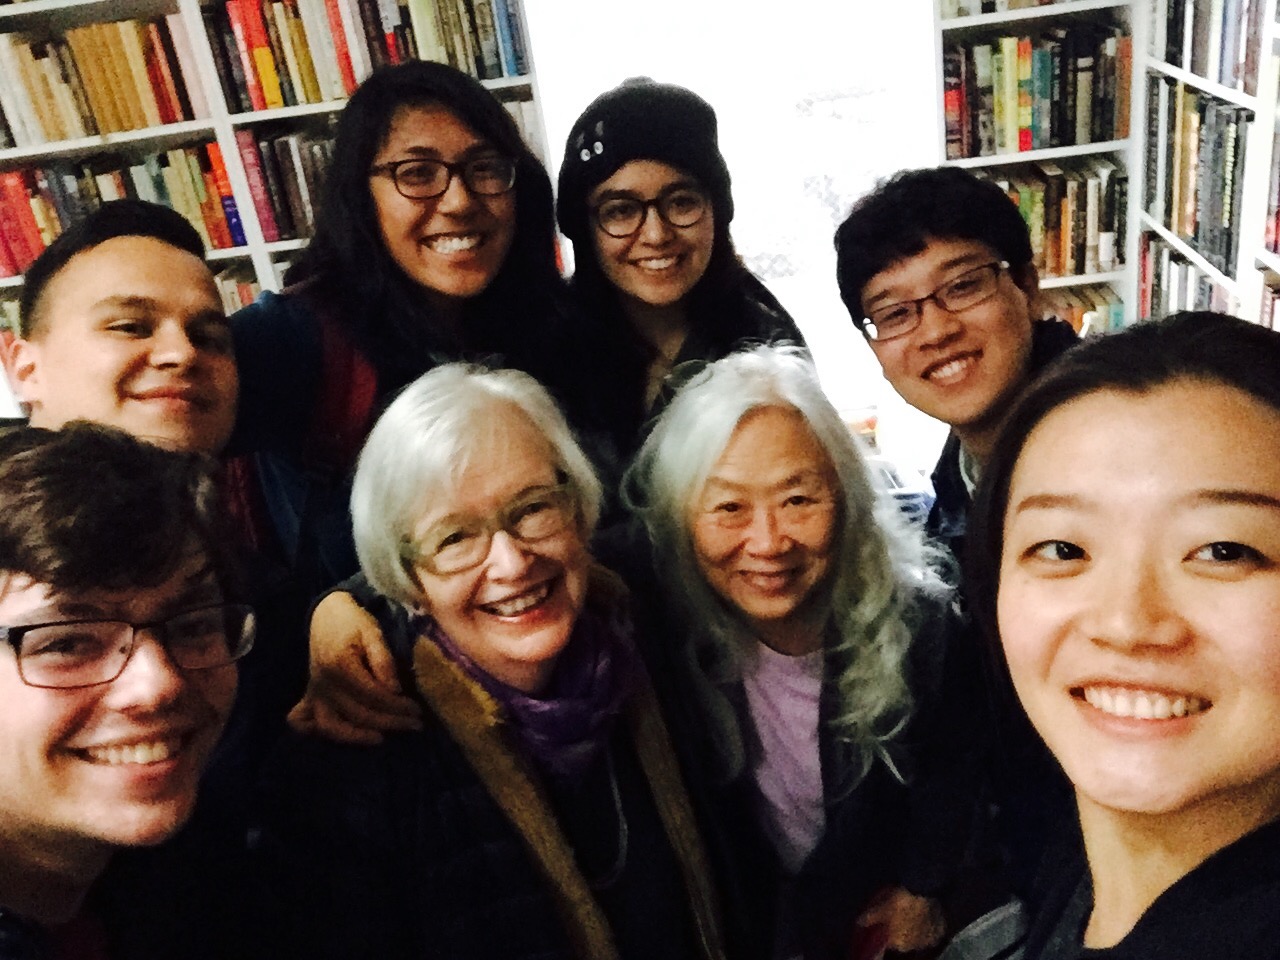 Susan Griffin, Maxine Hong Kingston, and Carleton students. Photo courtesy of Susan Griffin.